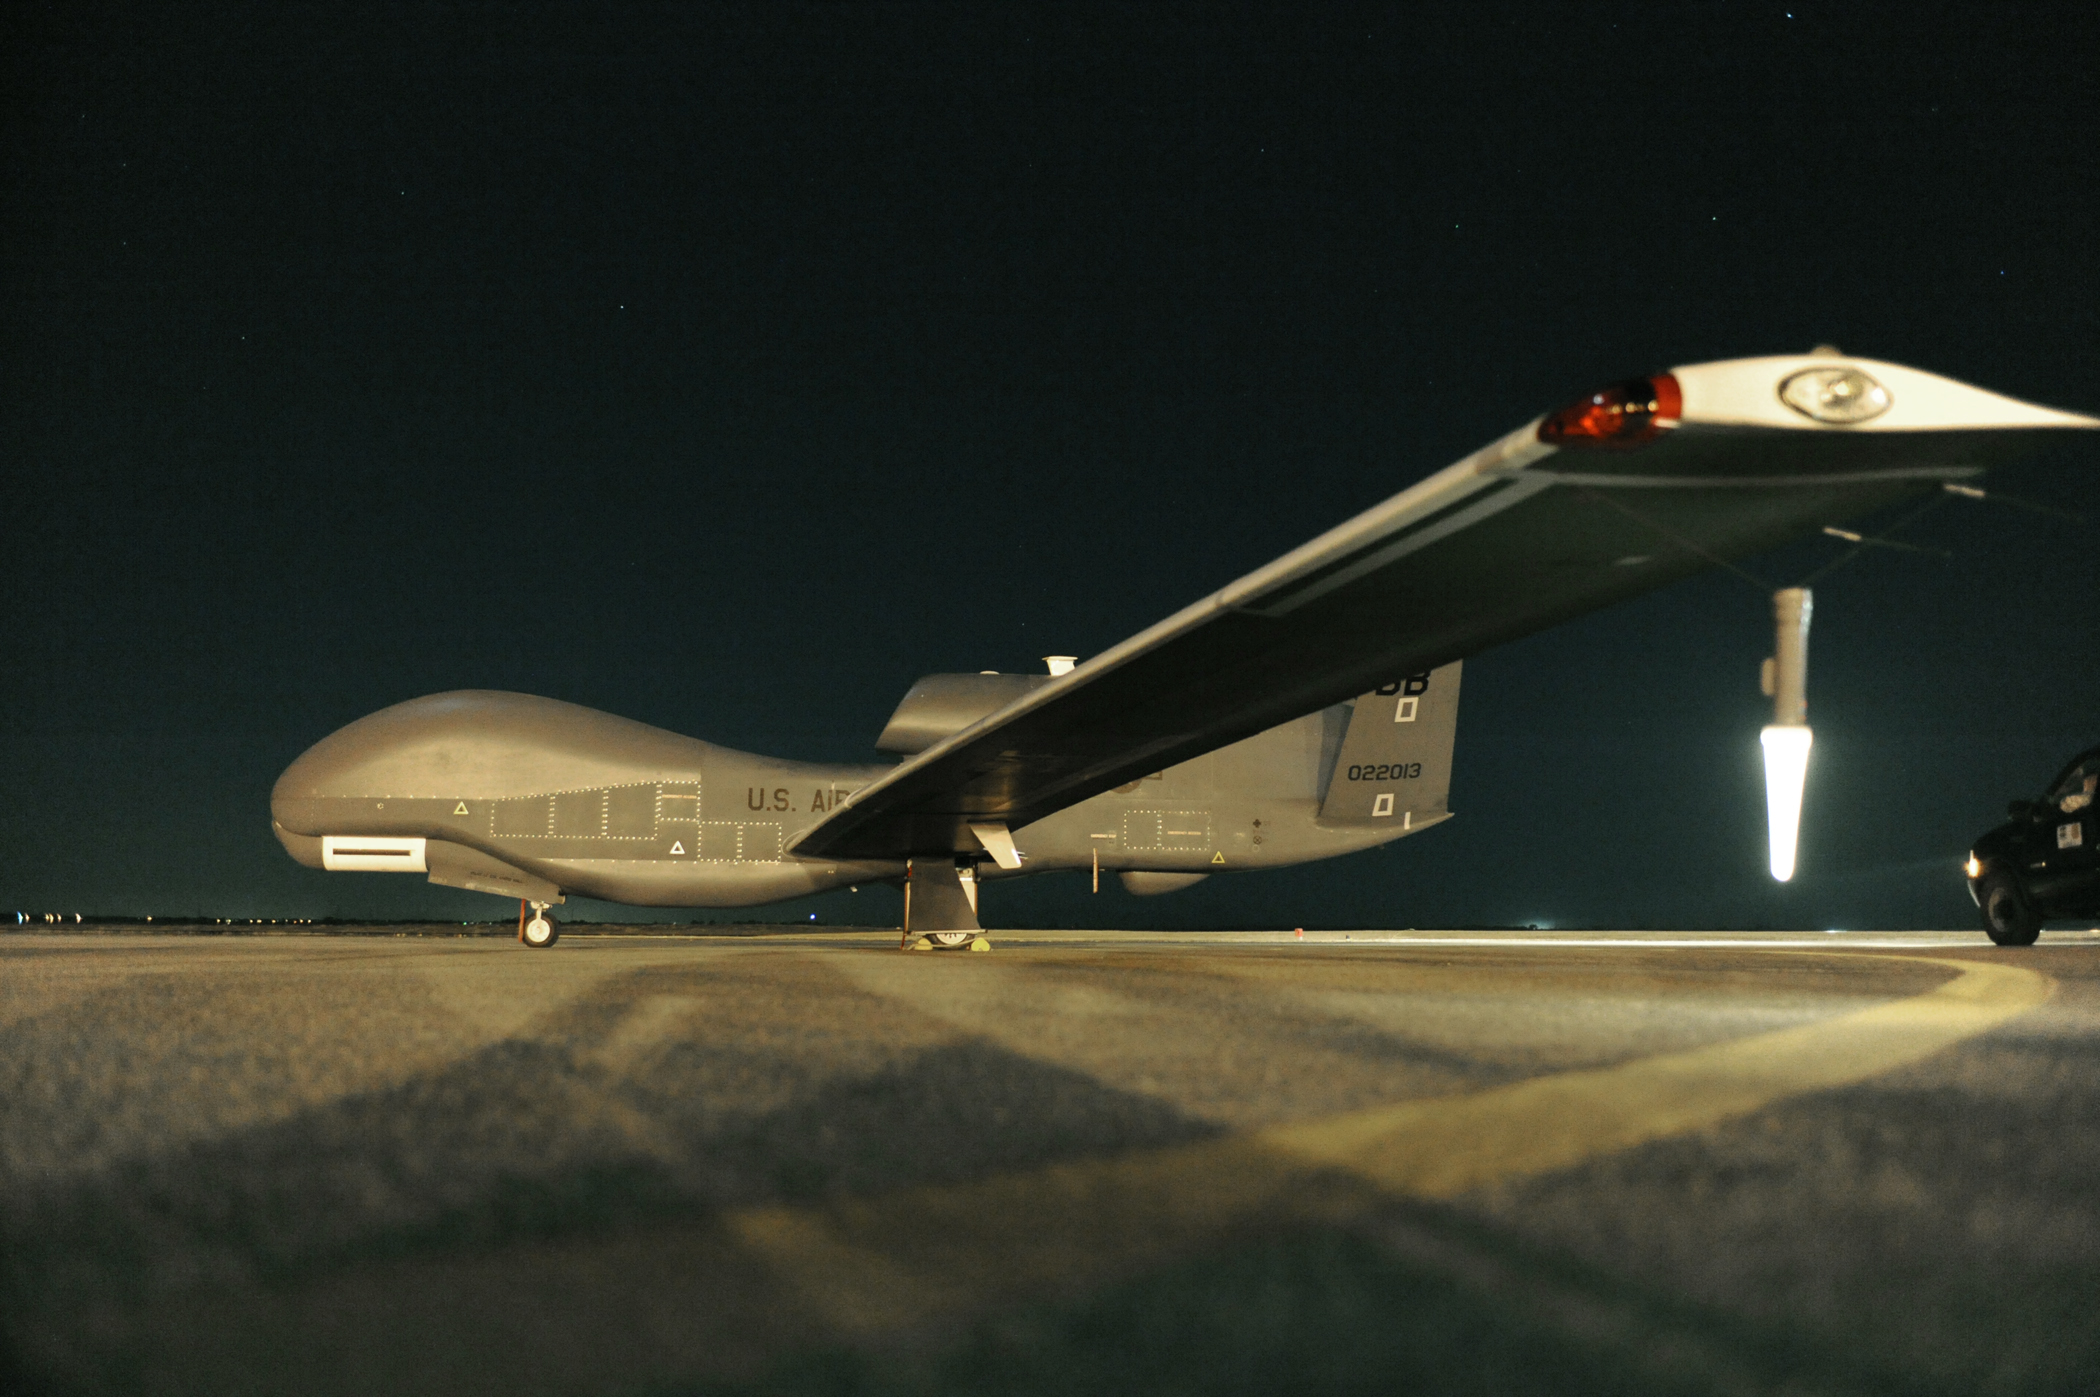 RQ-4 Global Hawk sits on the runway before beginning a nighttime mission. US Air Force Photo